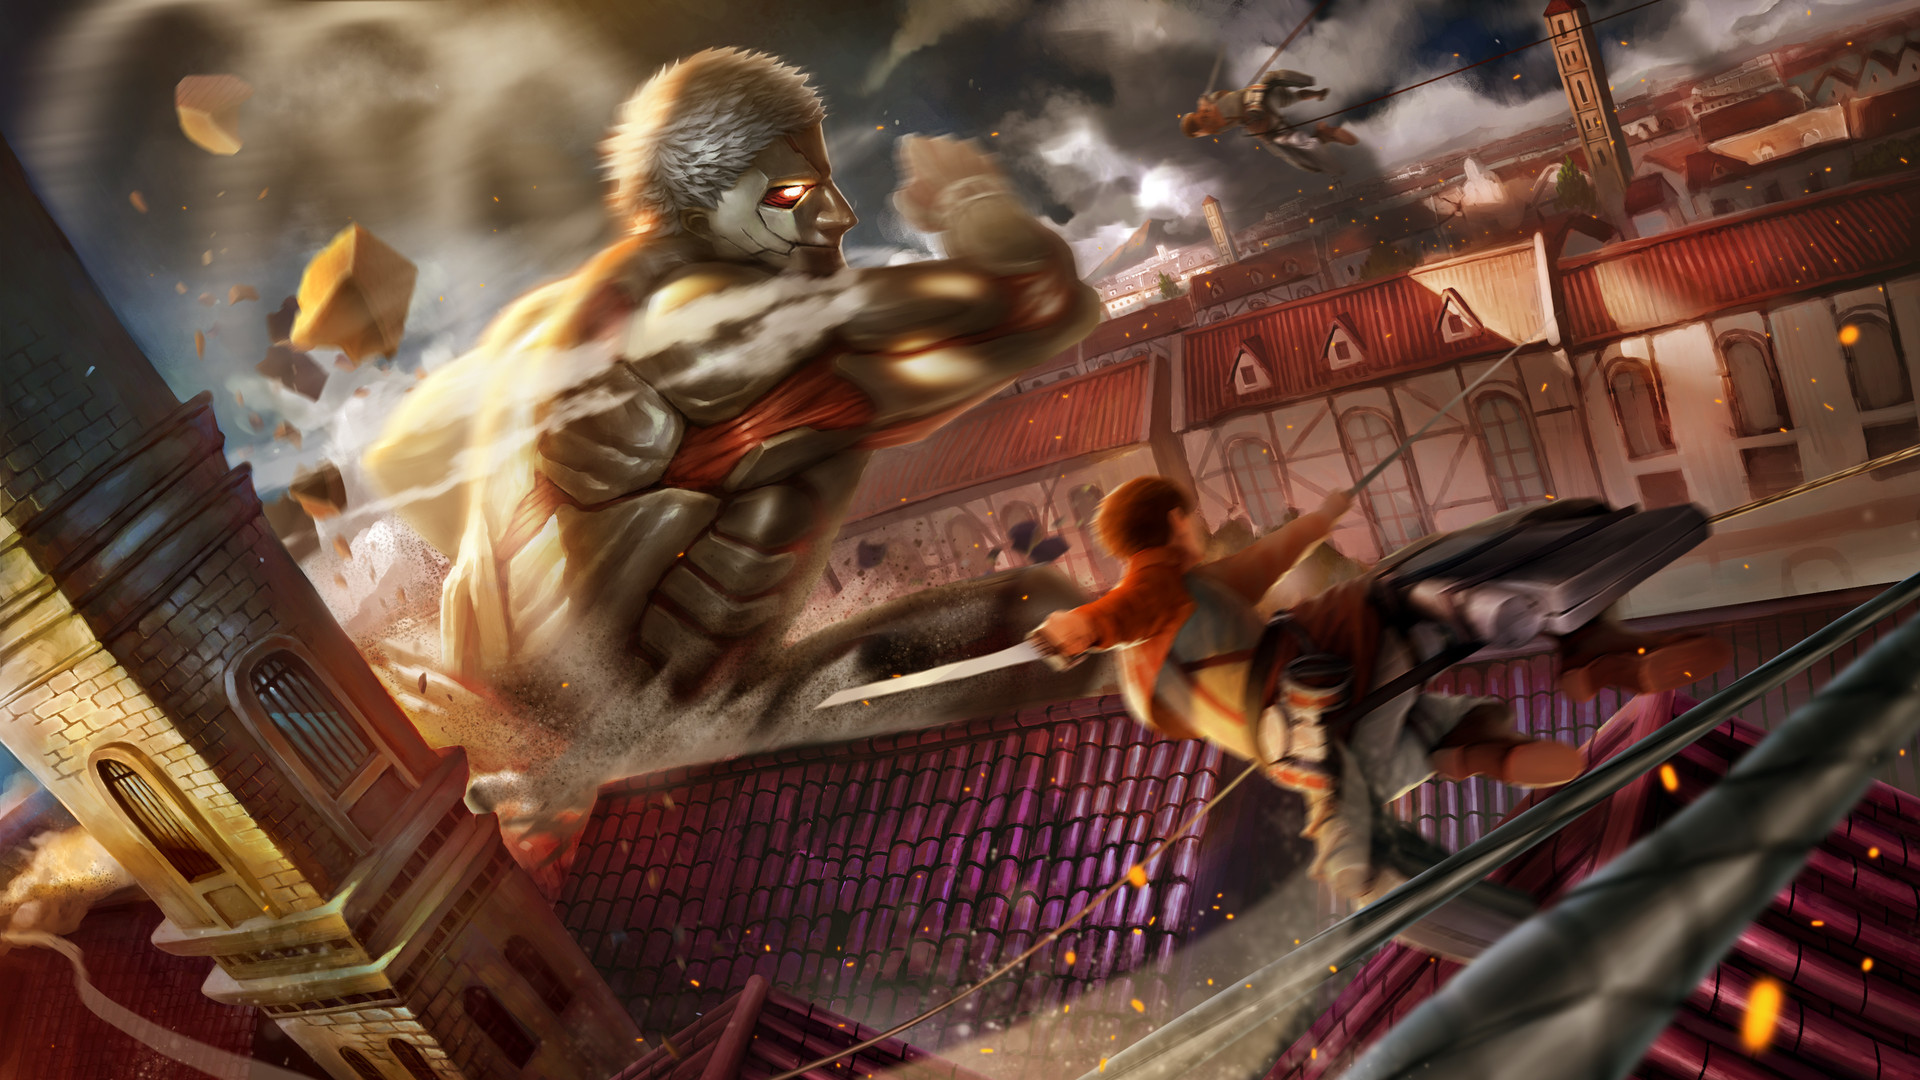 attack on titan wallpaper,action adventure game,cg artwork,adventure game,games,fictional character